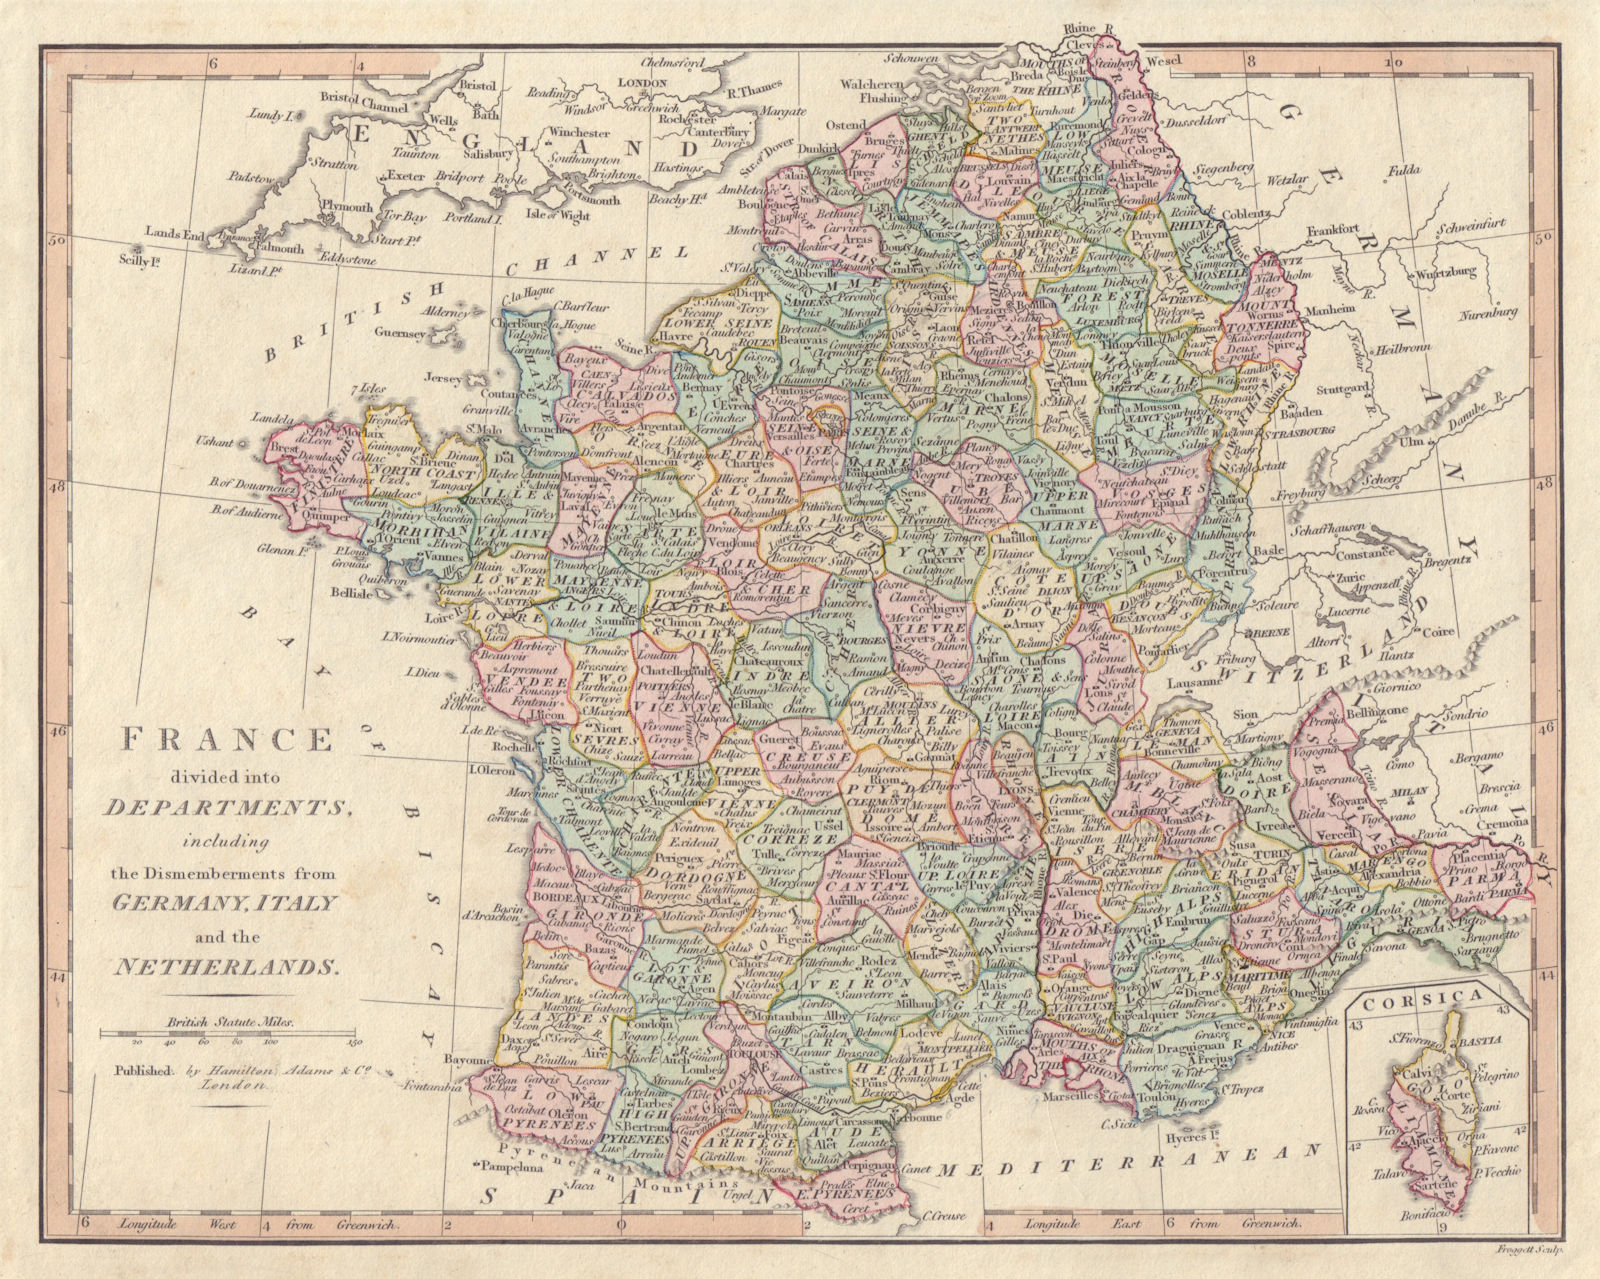 Associate Product France divided into Departments including the dismemberments… WILKINSON 1828 map